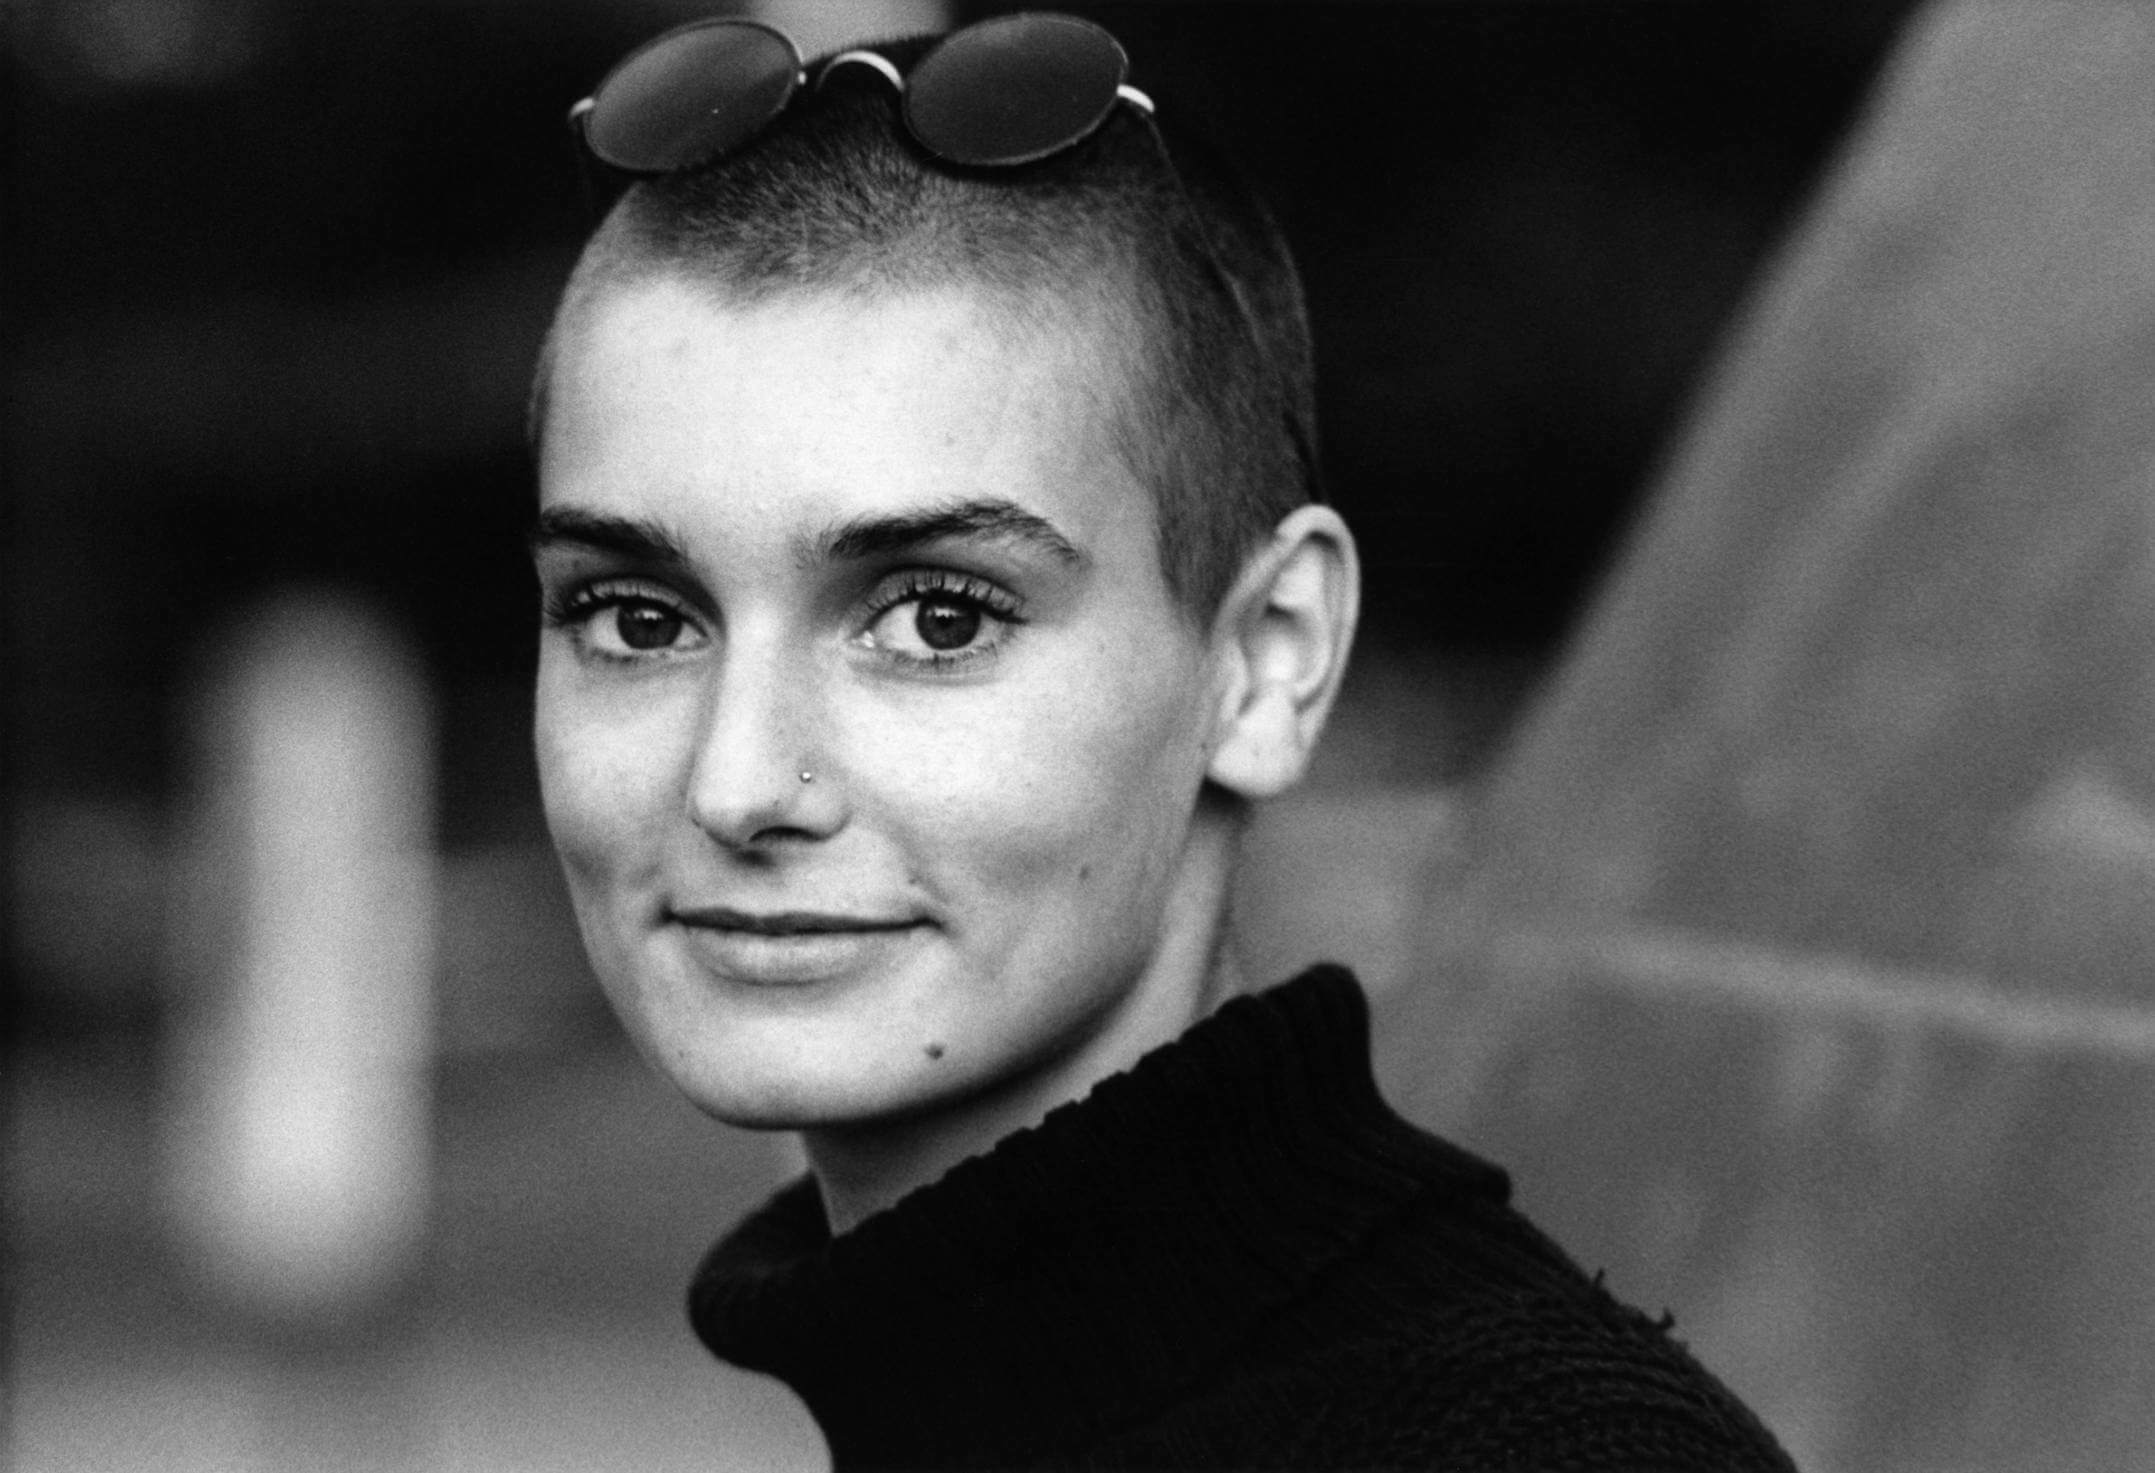 A black and white close-up photo of Sinead O'Connor